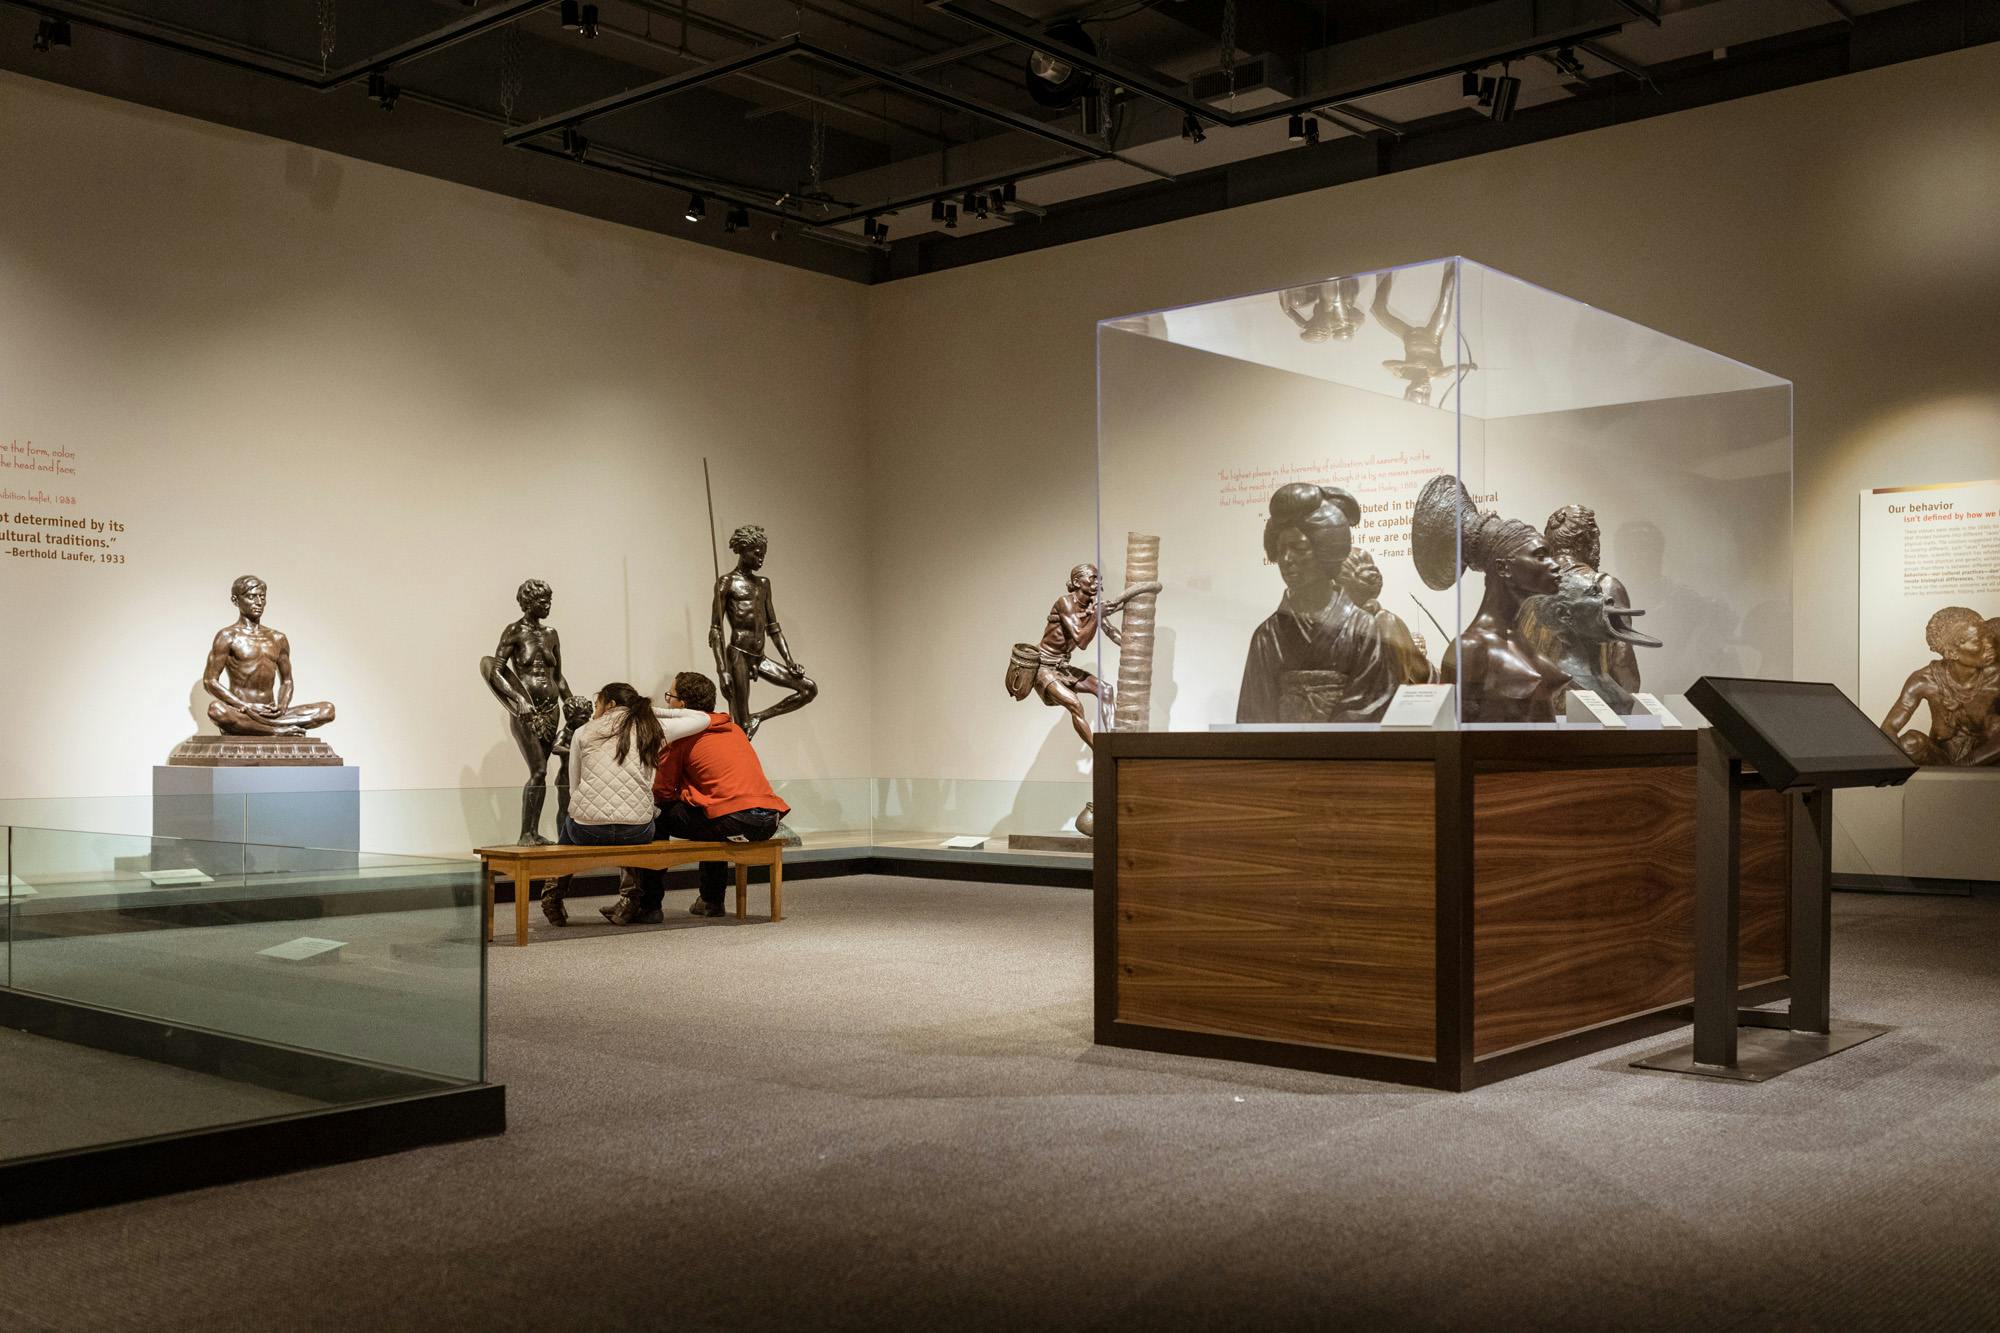 Two visitors sit together on a bench, looking at life-size sculptures of people by Malvina Hoffman. In the foreground several bronze busts are displayed in a glass case.